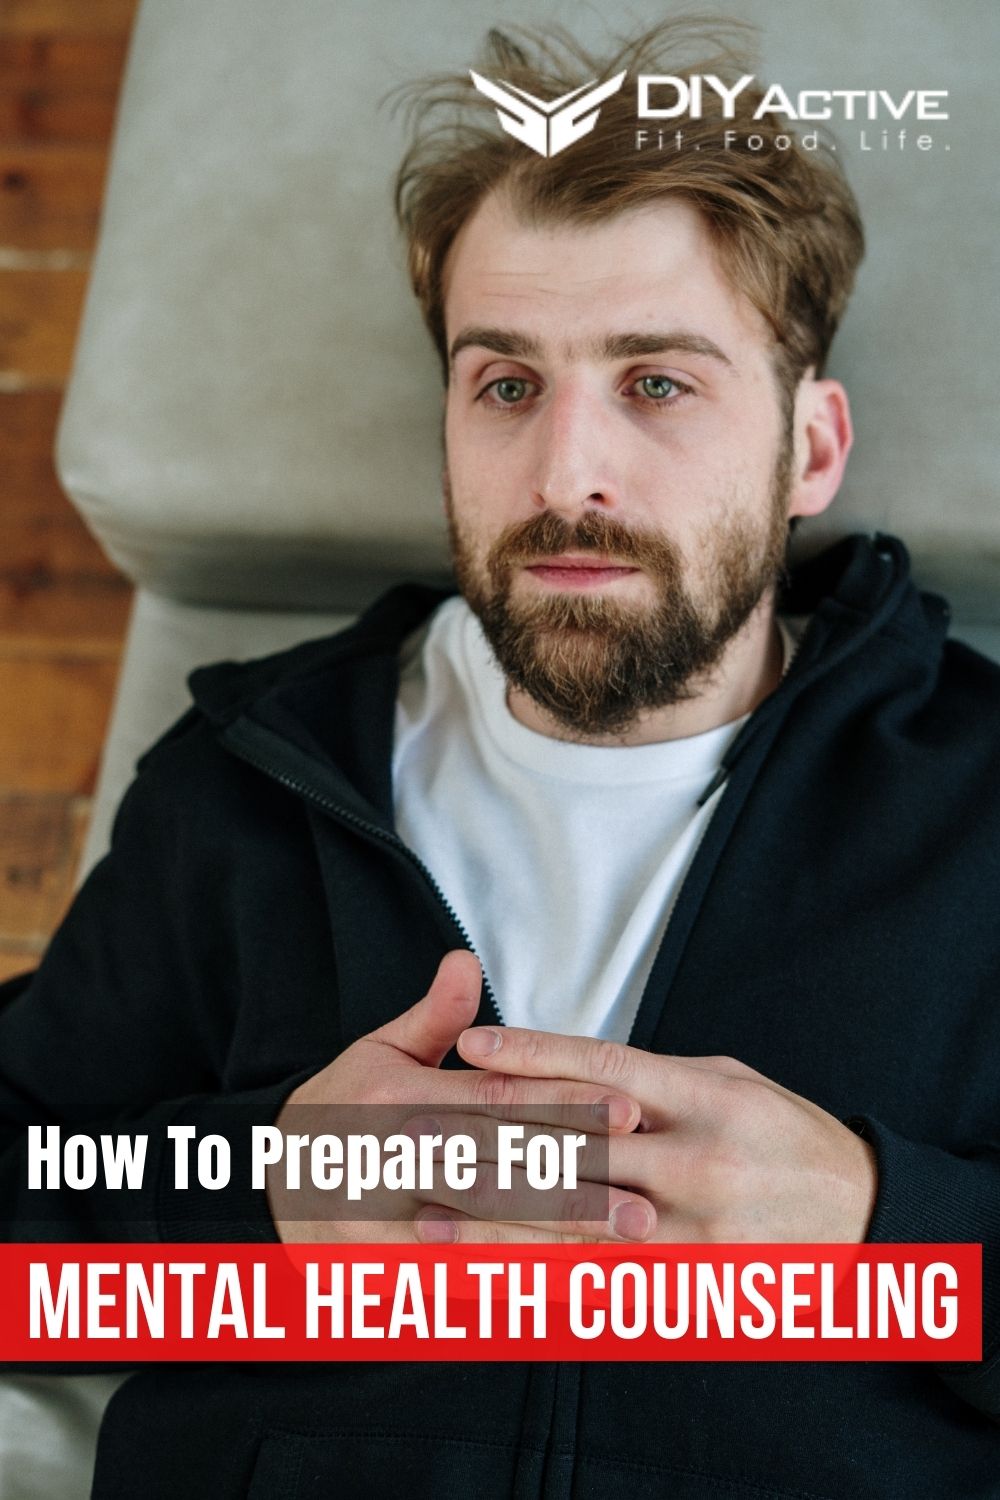 How To Prepare For Your First Mental Health Counseling